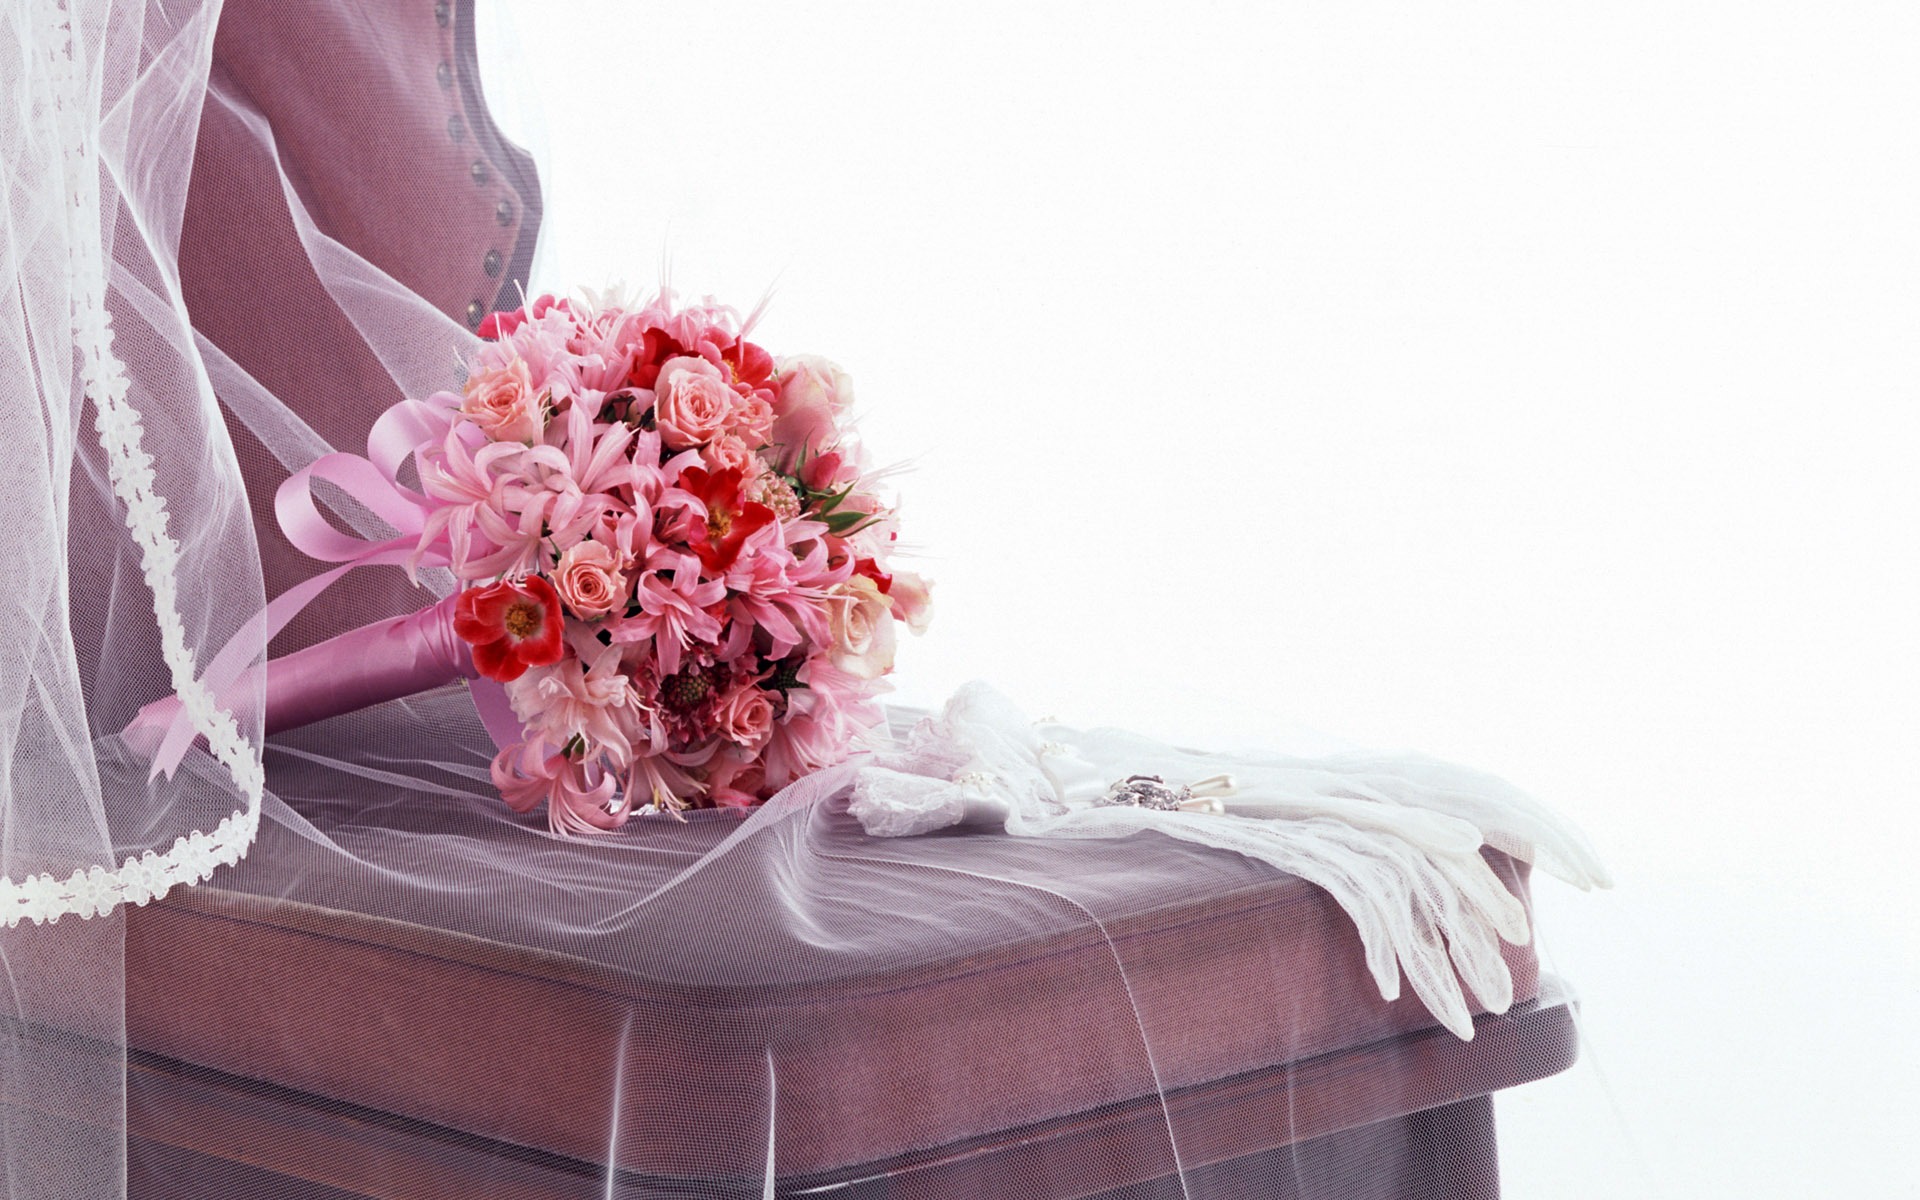 Weddings and Flowers wallpaper (1) #8 - 1920x1200